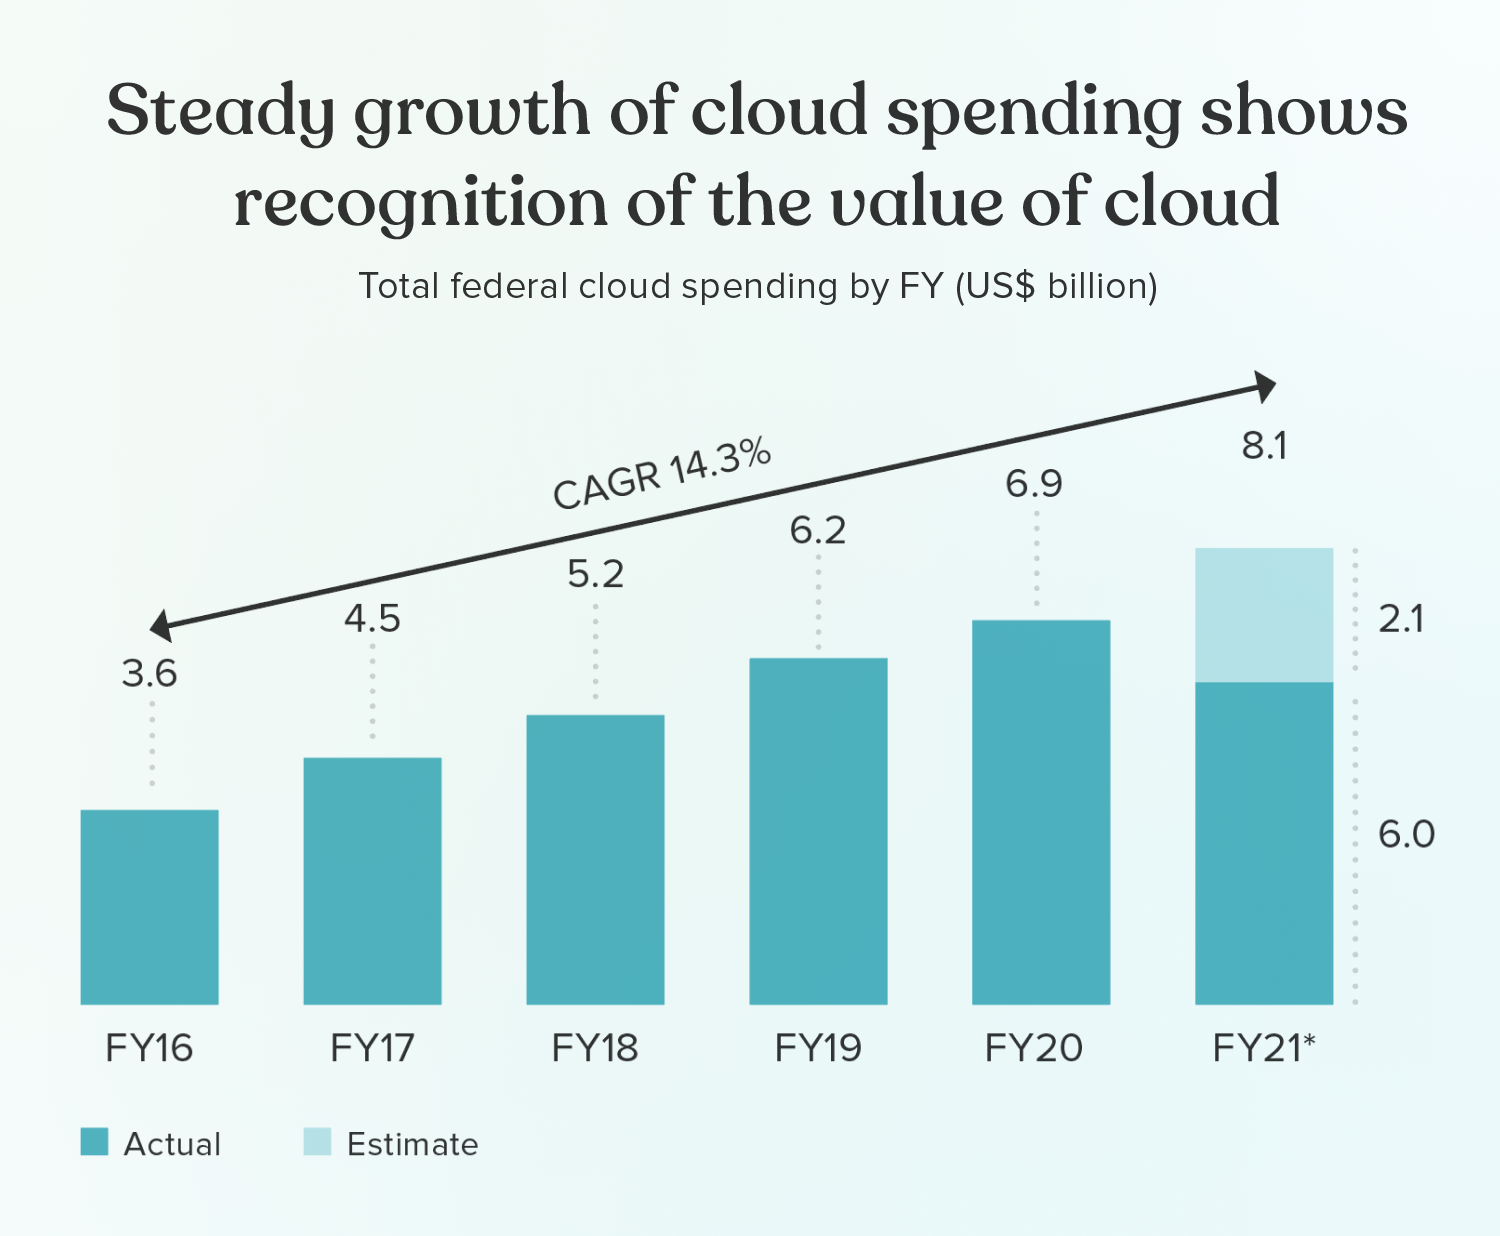 Growth in Cloud Spending 2016 to 2021 - Deloitte Insights